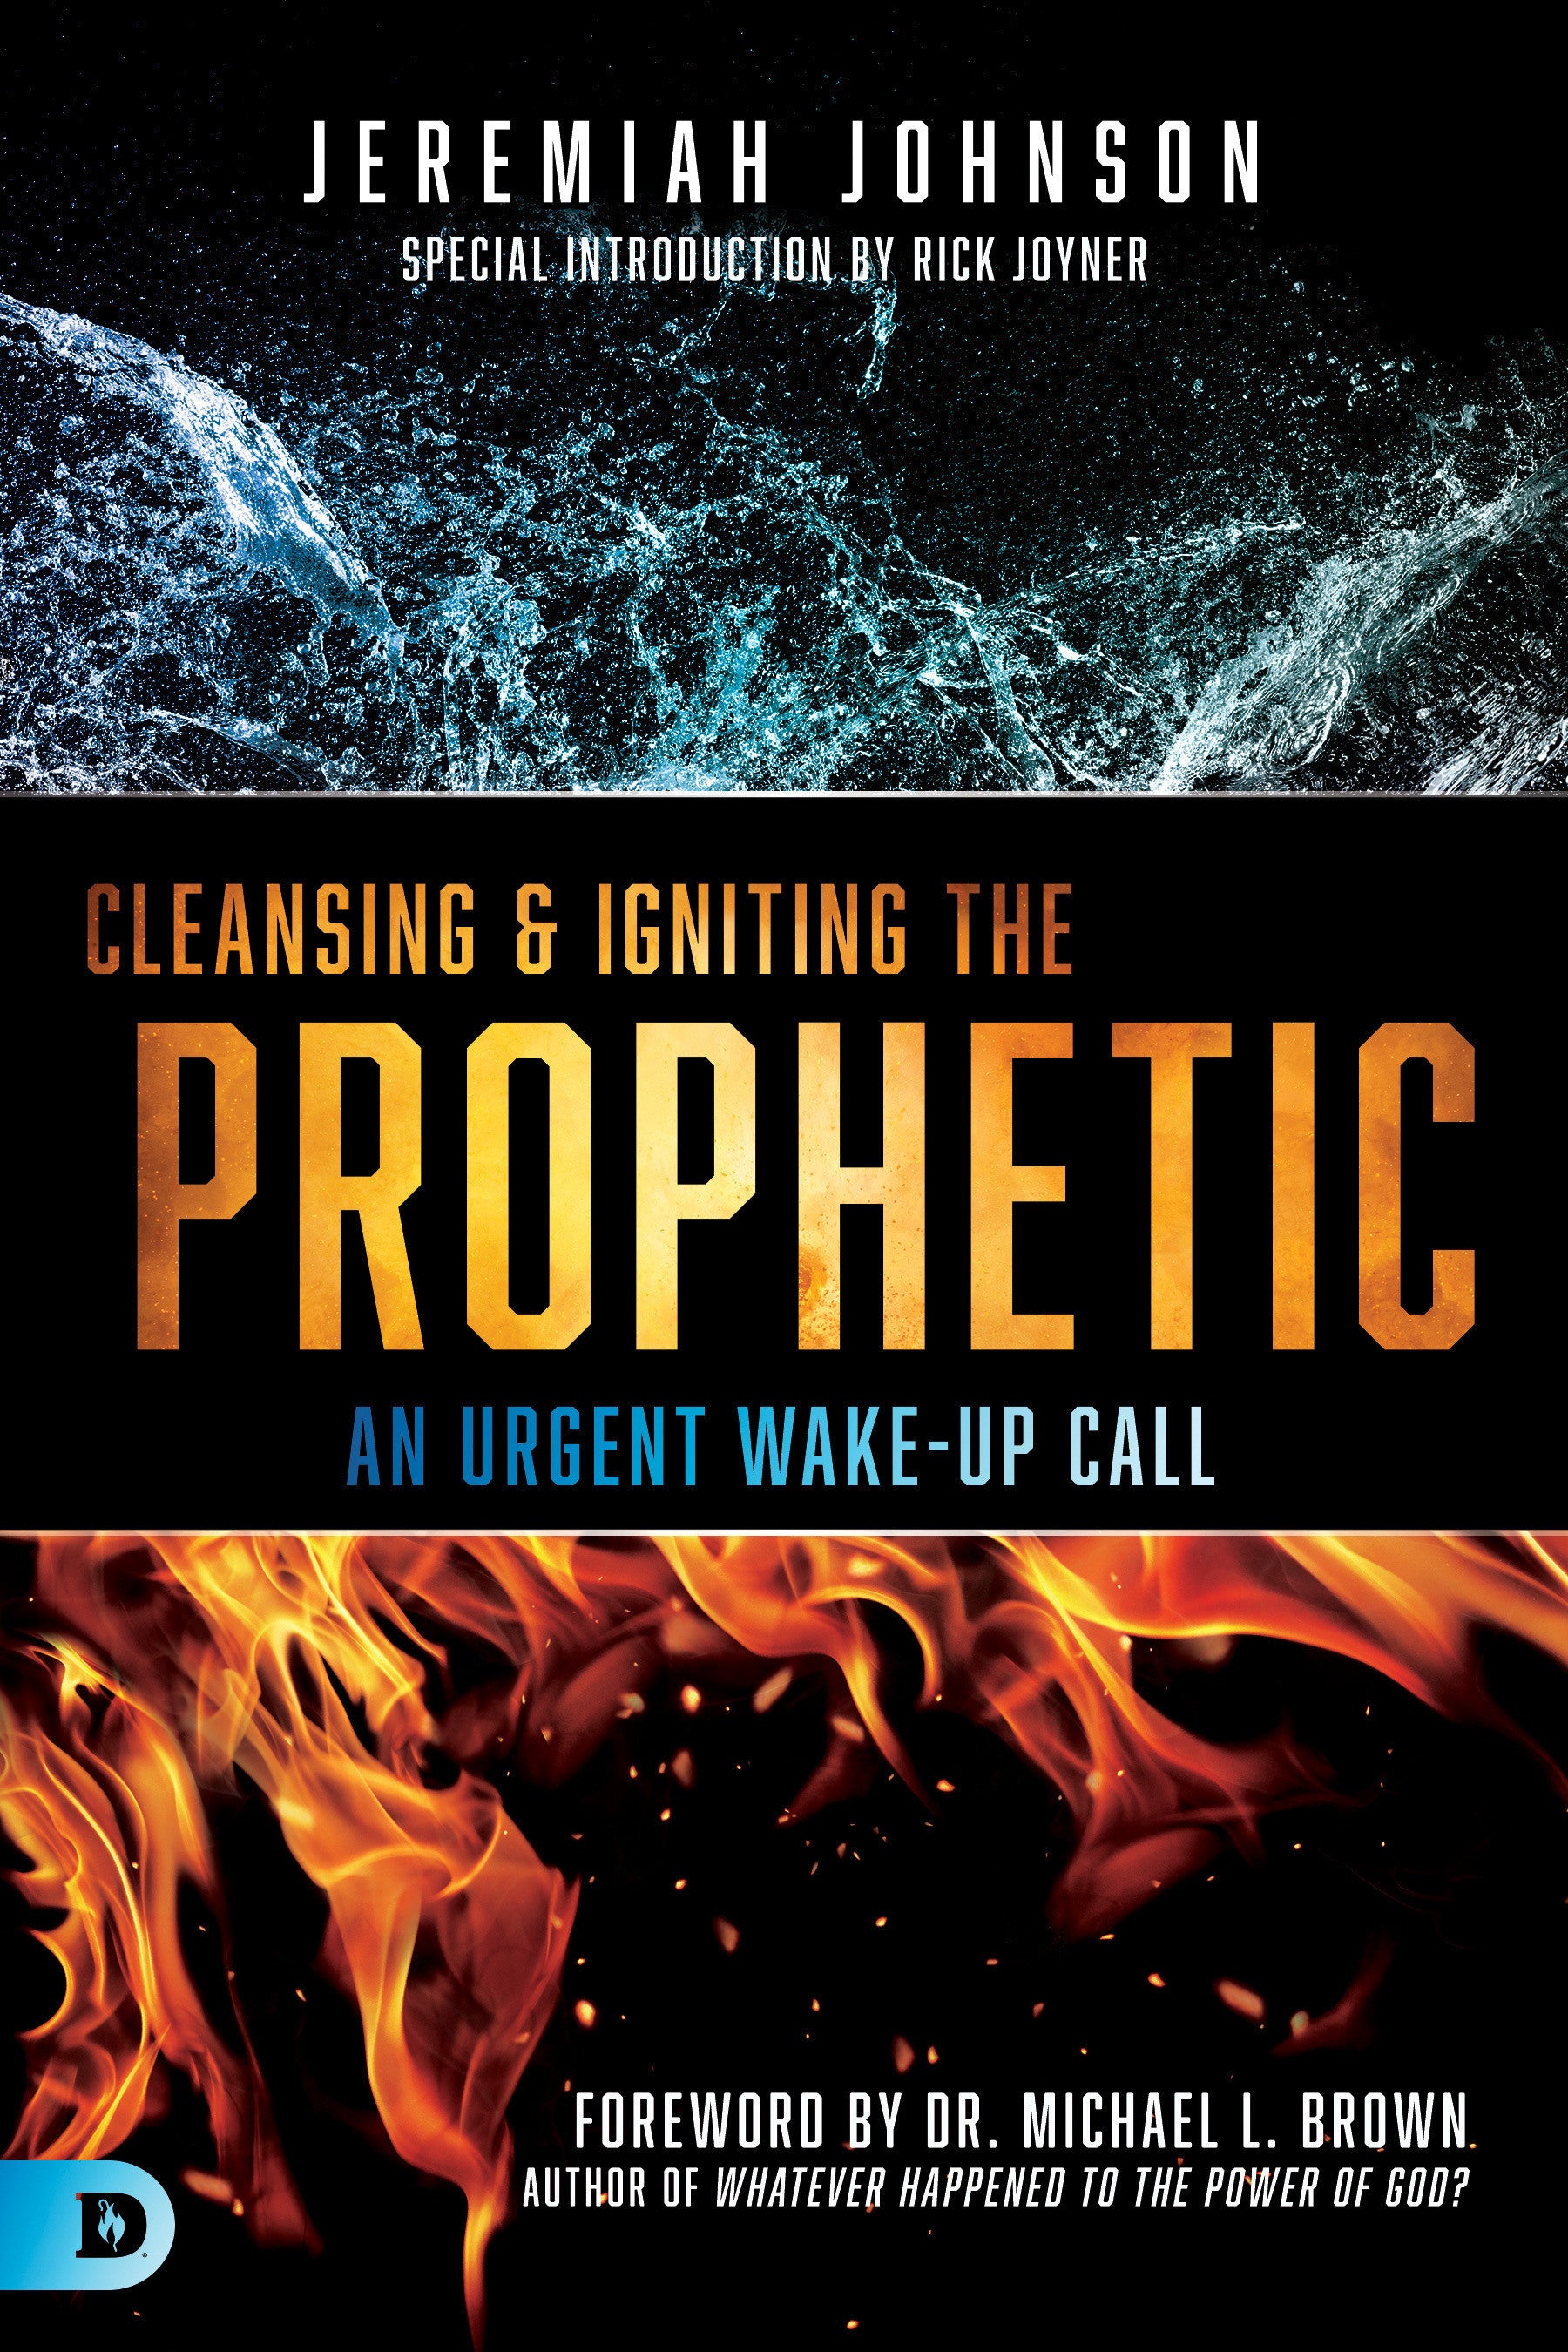 Image of Cleansing and Igniting the Prophetic other